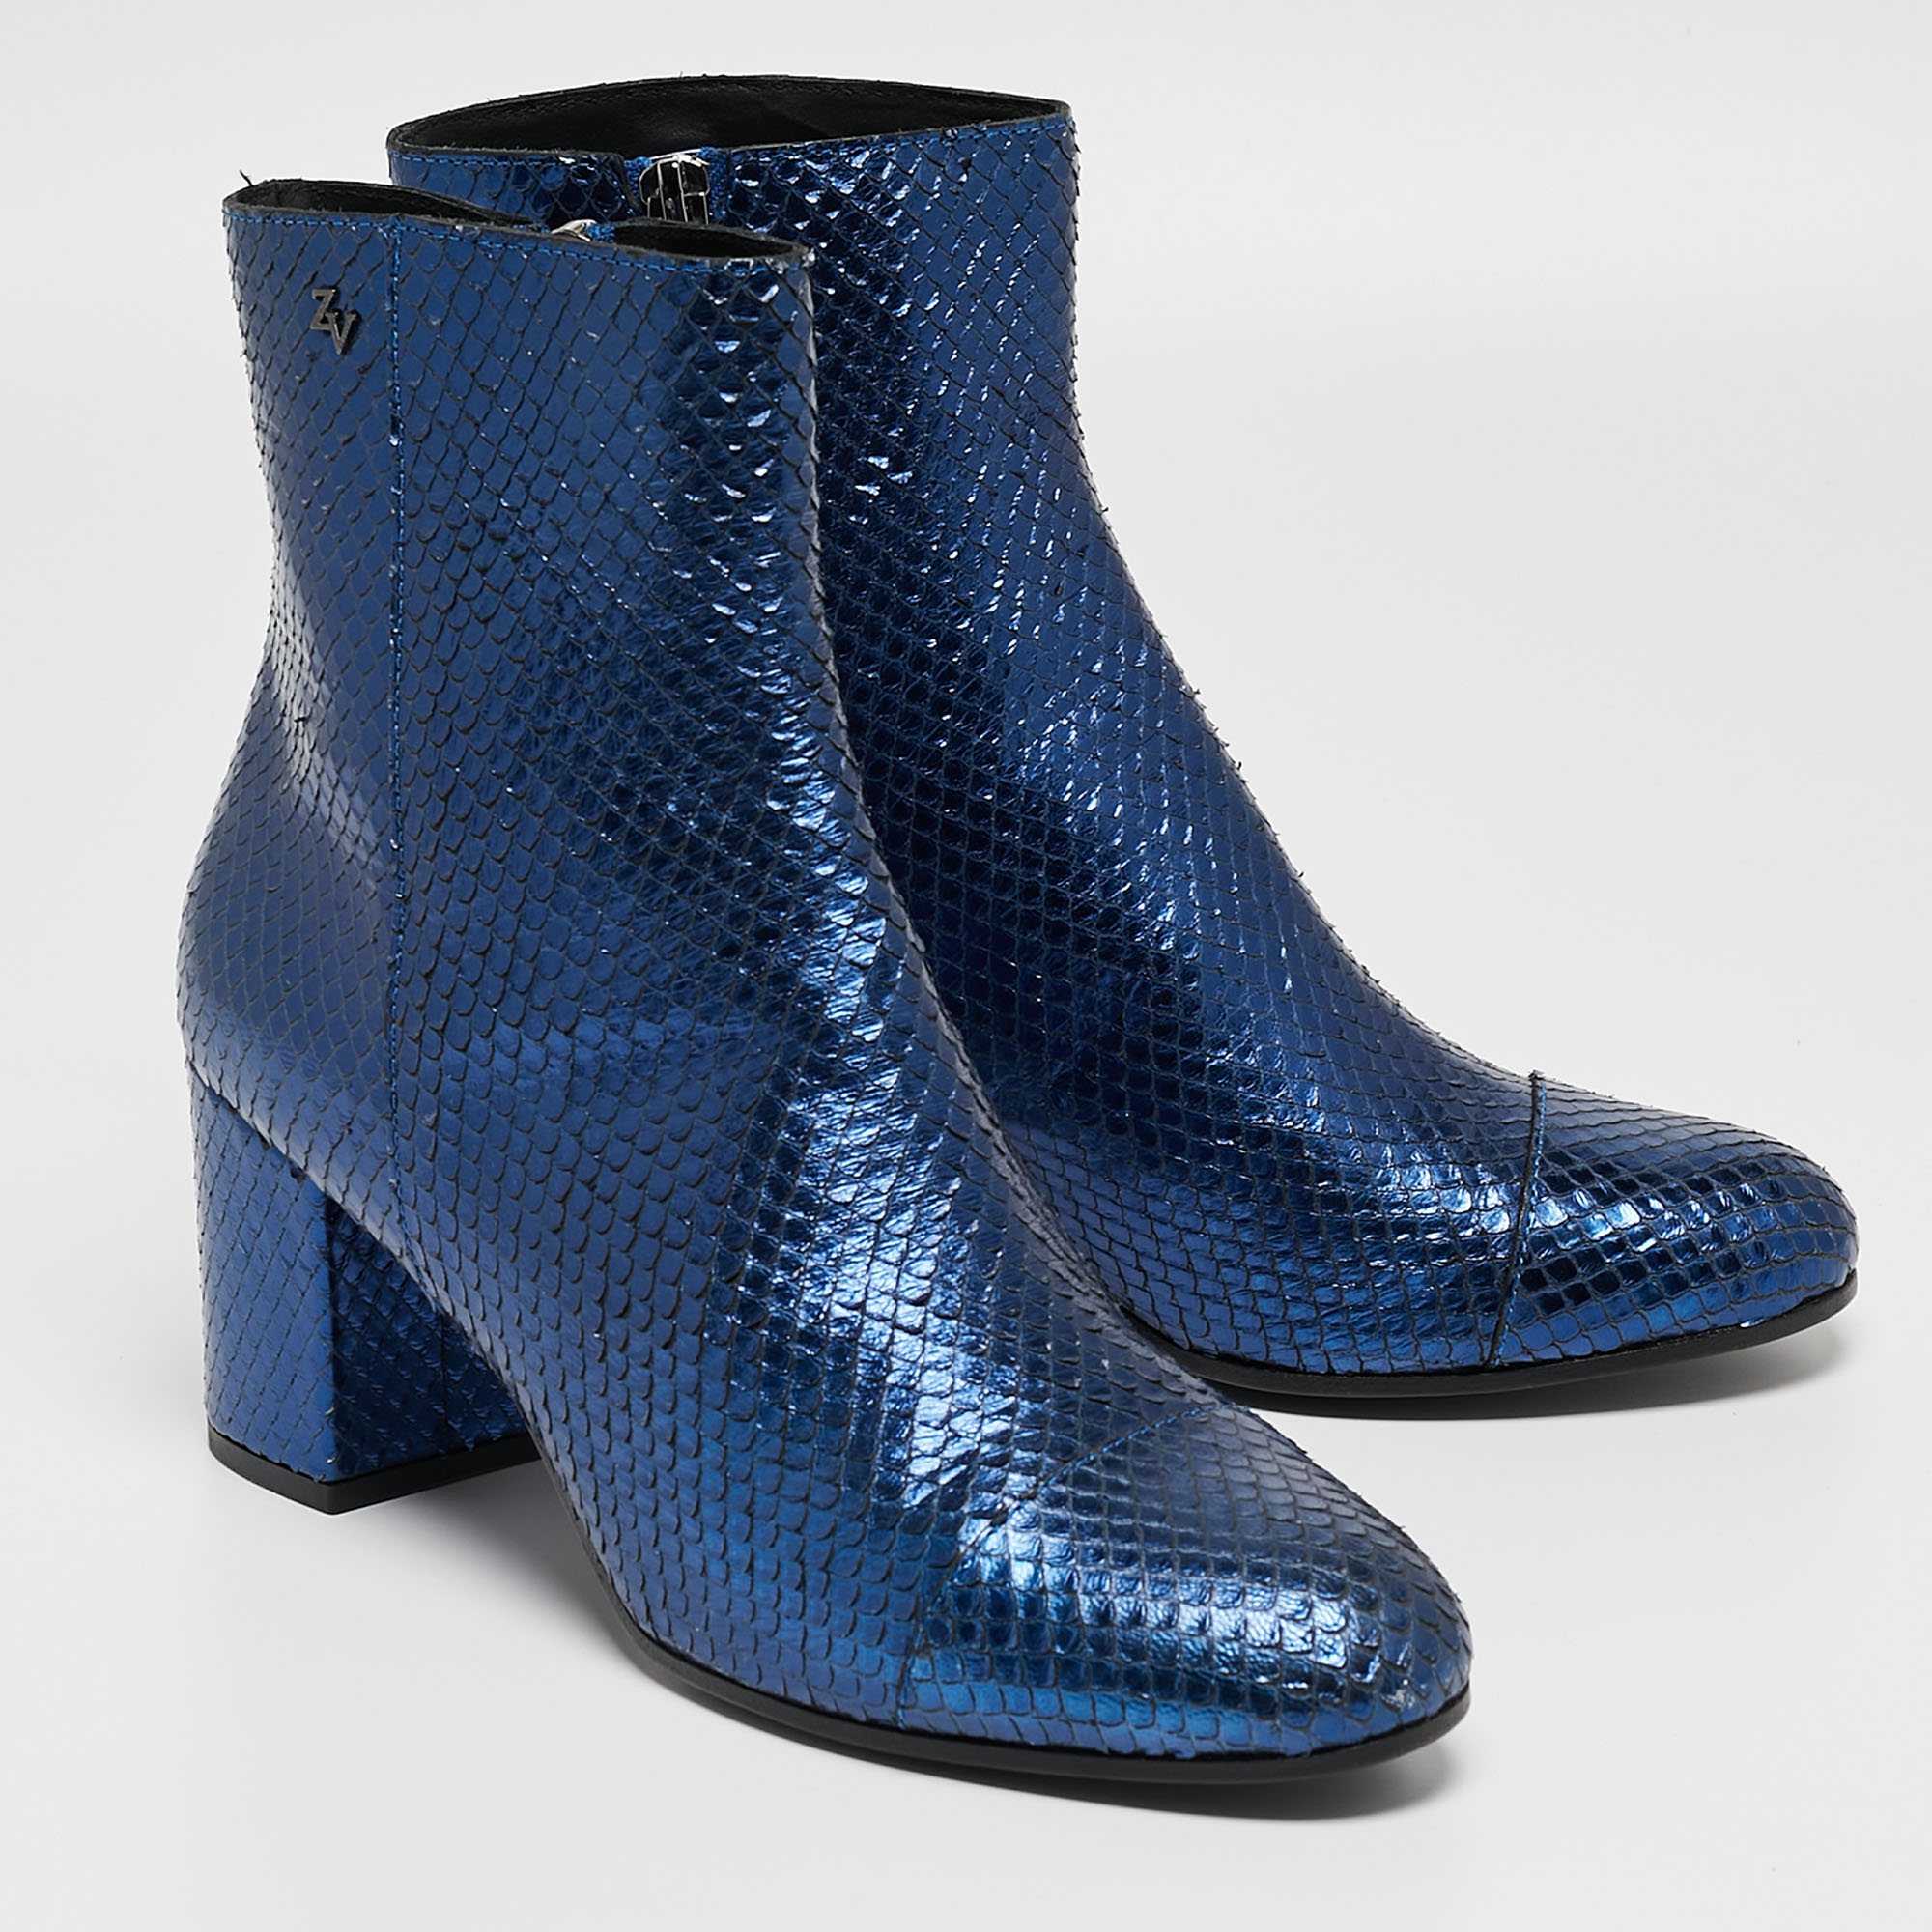 Zadiq & Voltaire Blue Python Embossed Leather Block Heel Ankle Boots Size 40